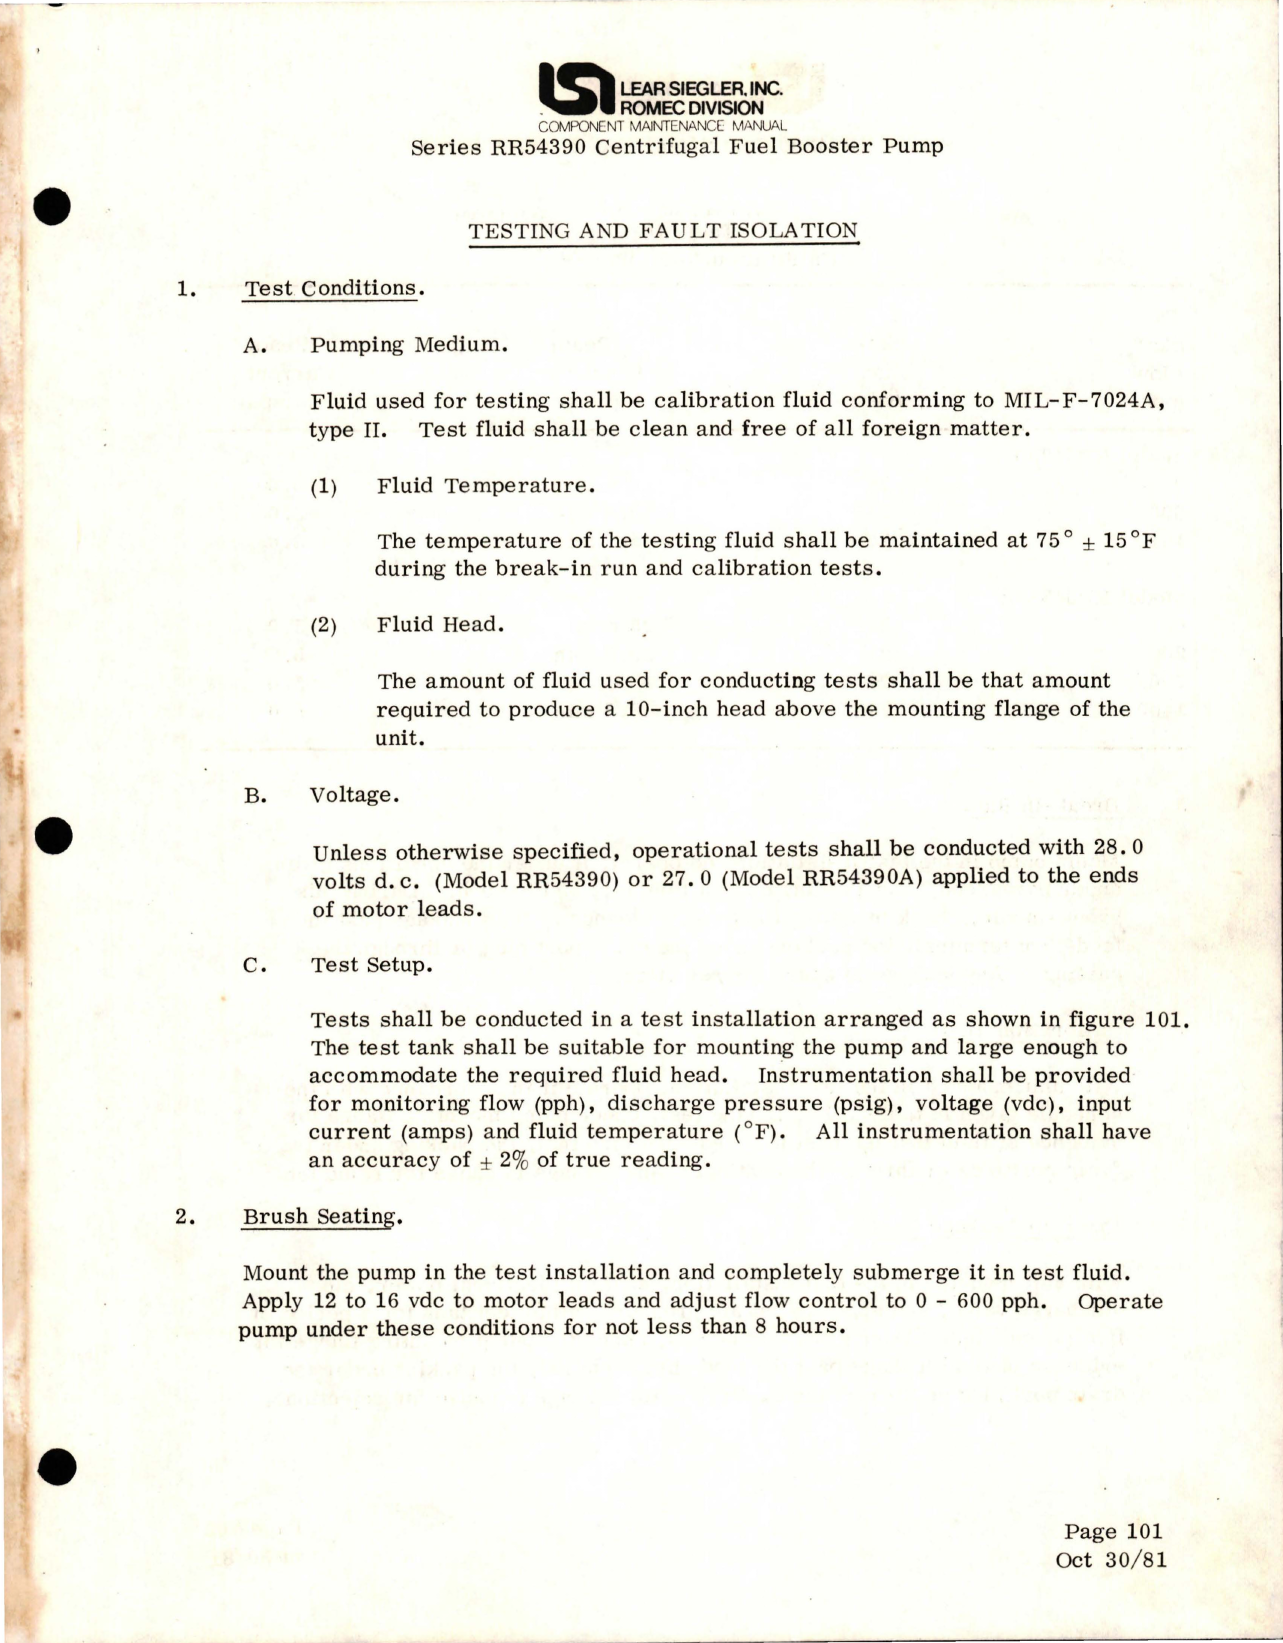 Sample page 7 from AirCorps Library document: Maintenance Manual for Centrifugal Fuel Booster Pump - Series RR54390